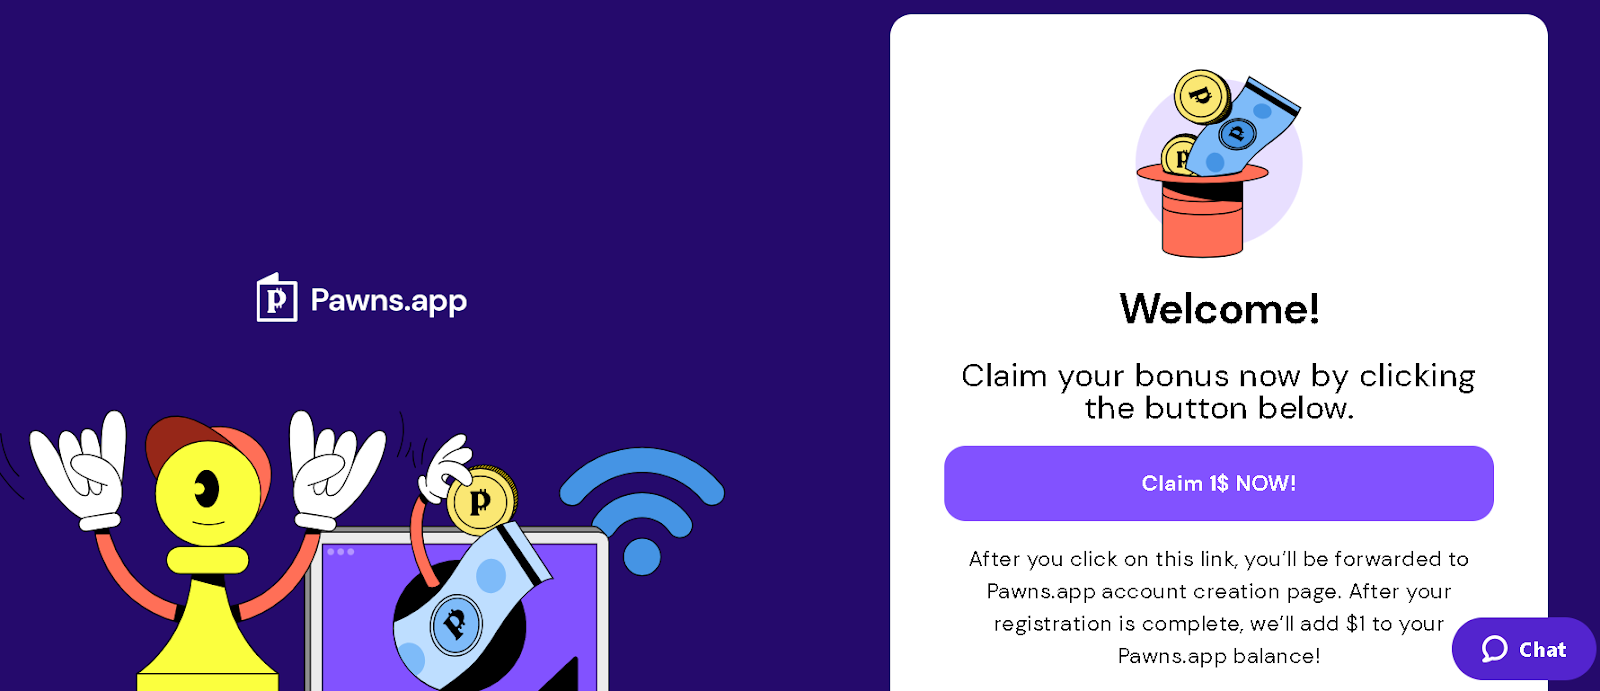 Pawns.app: A legit way to earn passive income online?